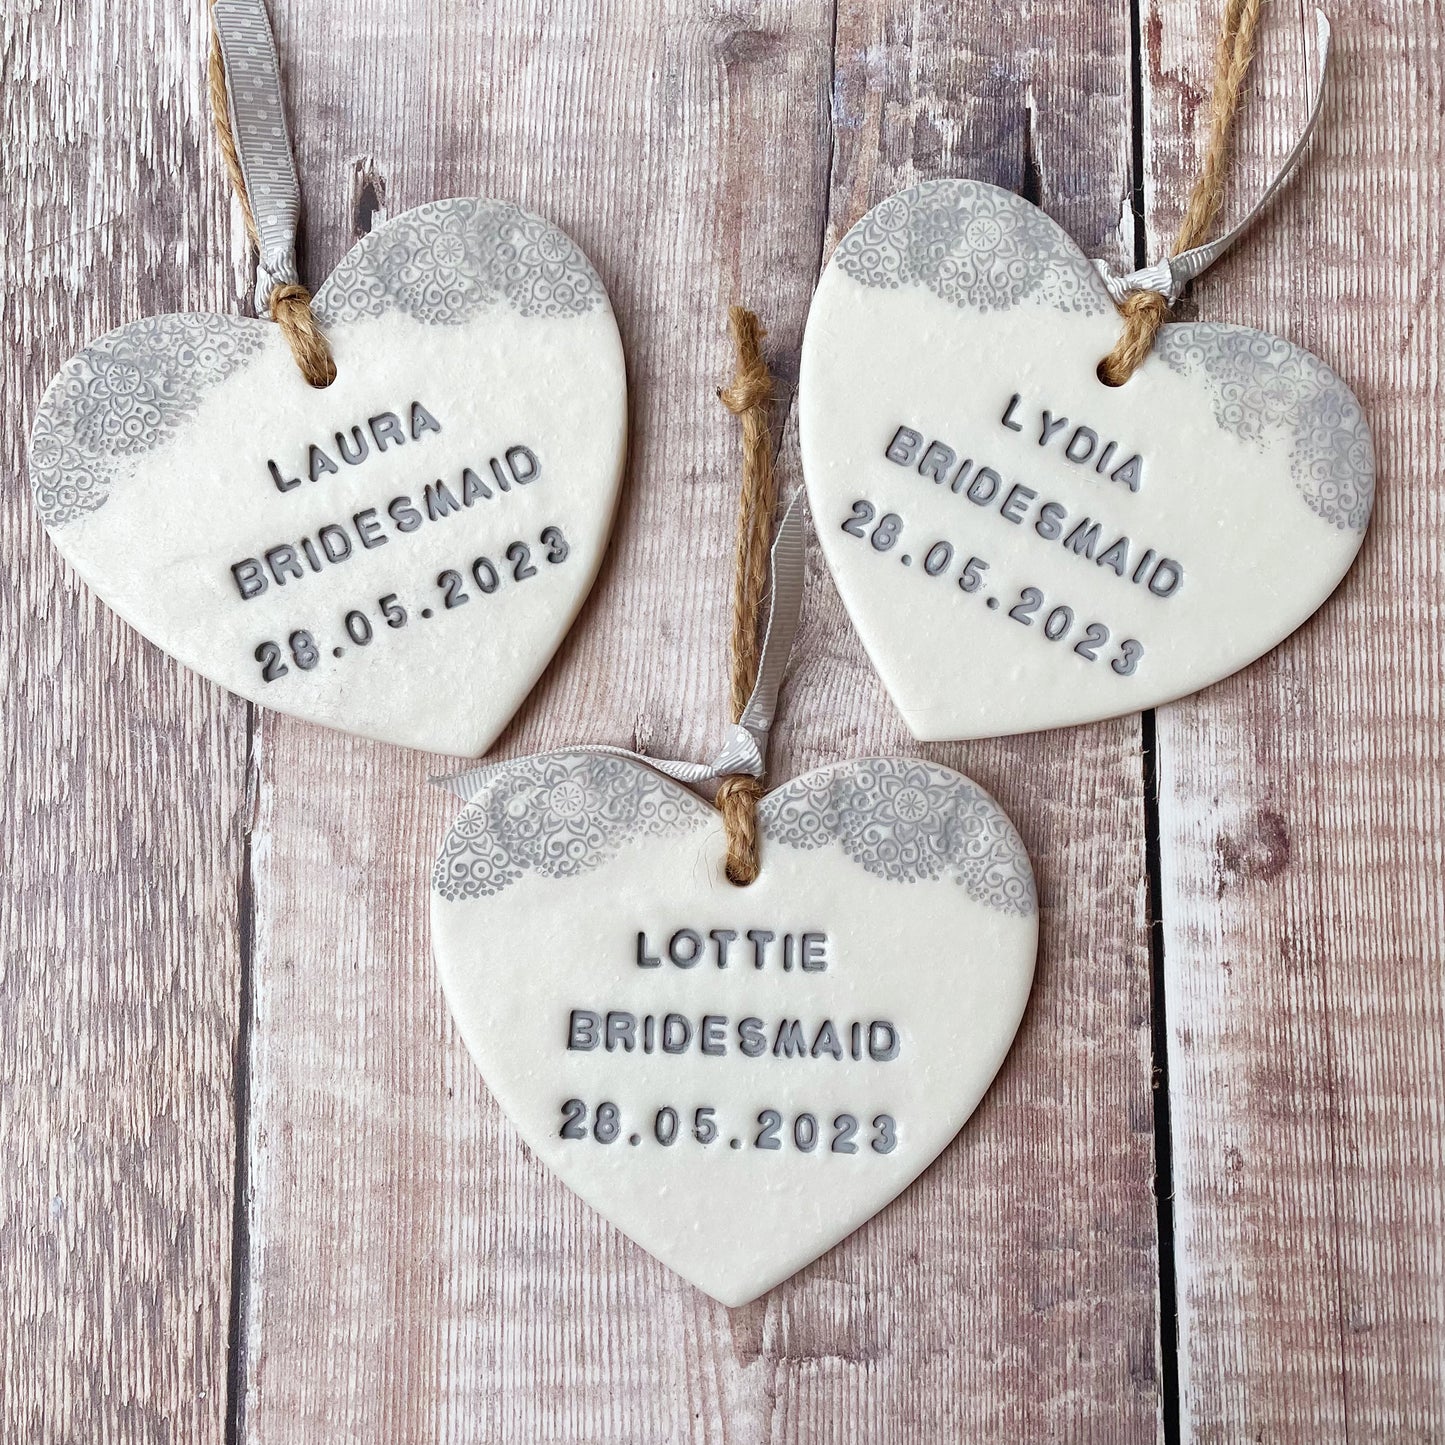 3 Personalised Bridesmaid thank you gifts, pearlised white clay hanging hearts with a grey lace edge at the top of the heart, the hearts are personalised with LAURA BRIDESMAID 28.05.2023, LYDIA BRIDESMAID 28.05.2023 and LOTTIE BRIDESMAID 28.05.2023